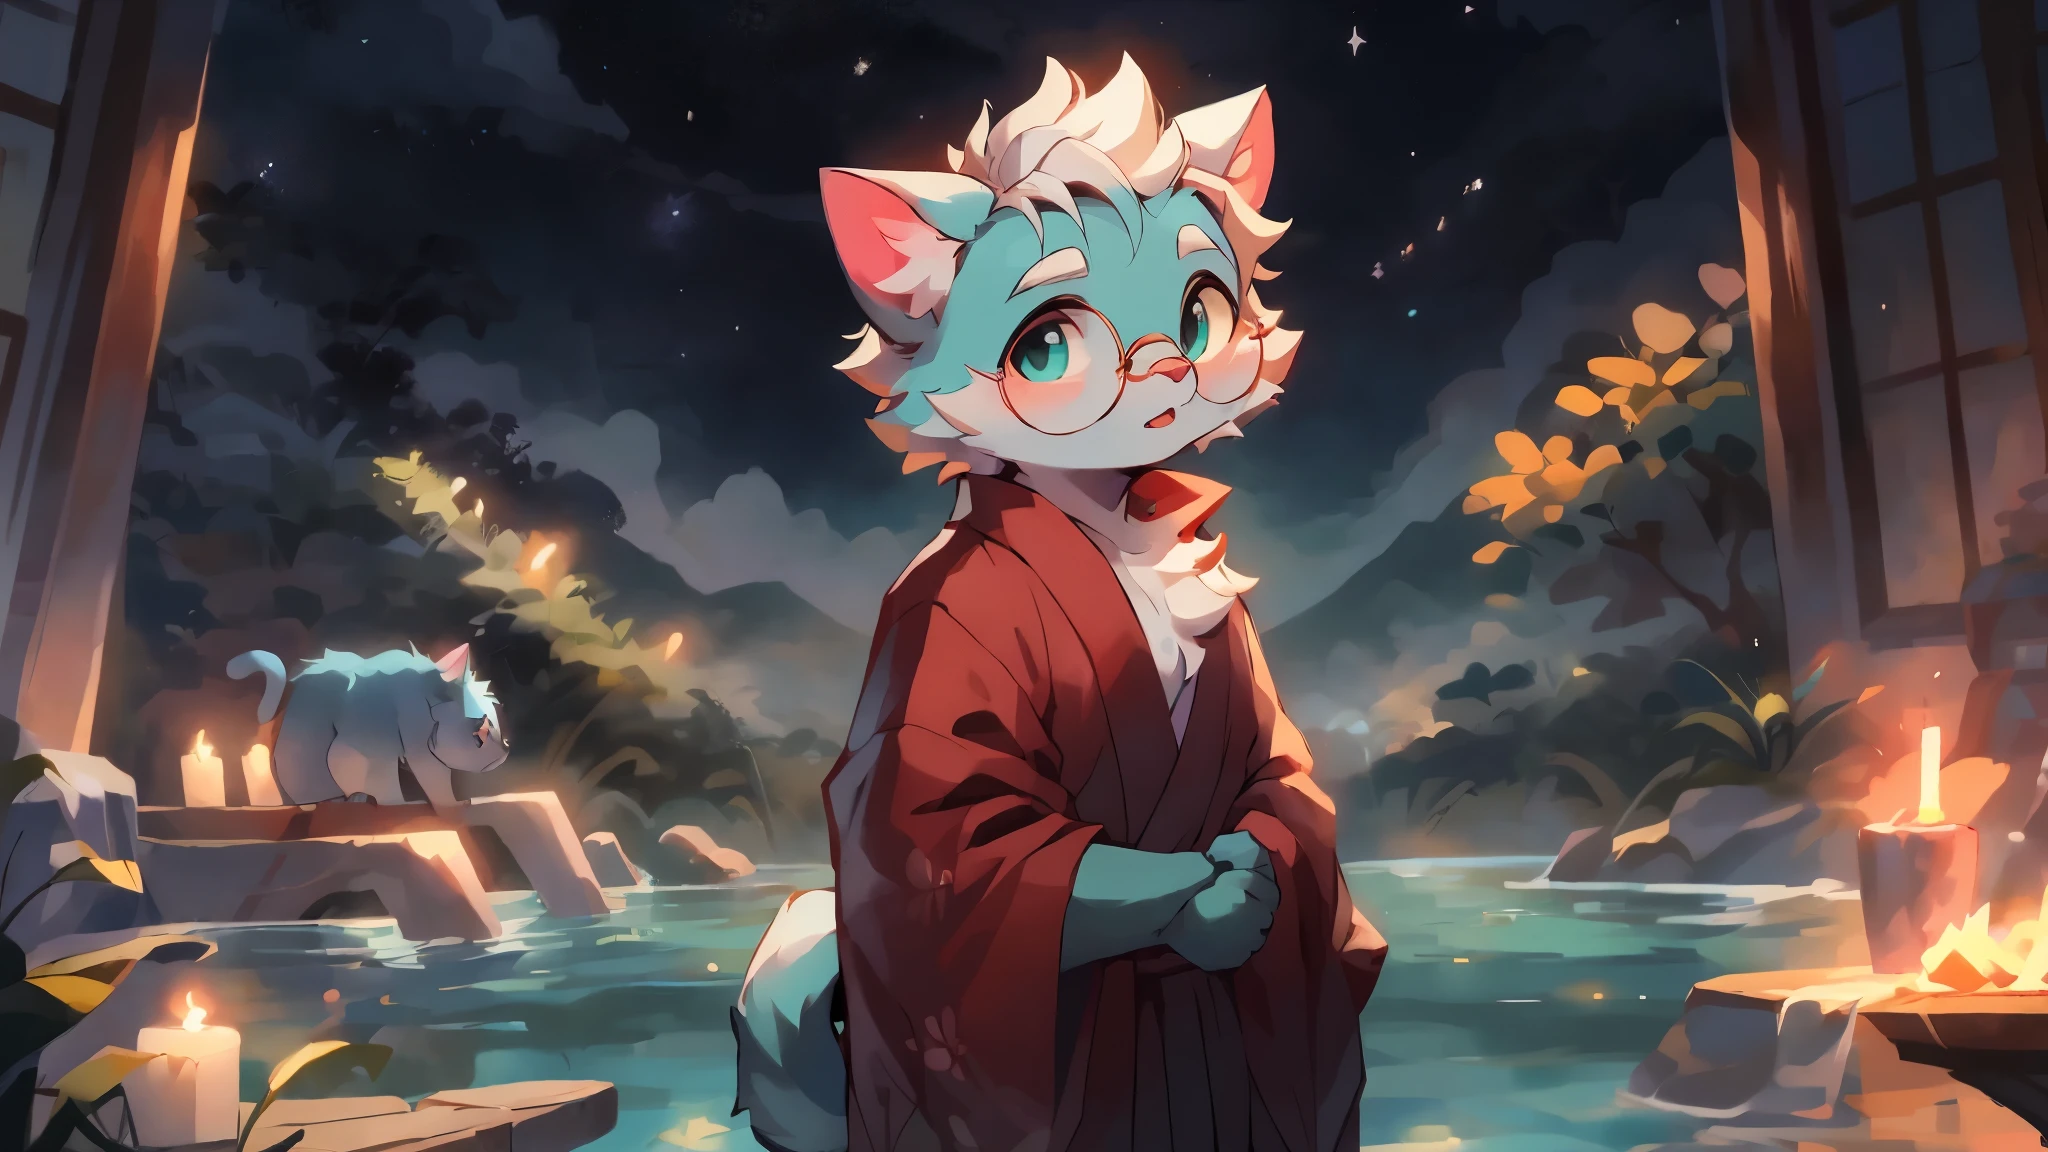 a portrait of a old, fully grown mature and aged  male cat with big round circle glasses and a red scarf, The cat is very tall. bushy tail, and perked-up fluffy big ears, one ear is lowered. He is fully clothed, he wears a fluffy warm and cozy kimono, a handsome cat fursona with teal fur color, the chest has white fur, white fur around his mouth and cheeks, medium-length white hair, fluffy black cat ears, and a fluffy white neck.  He is standinf on water, He is looking up at the colorful starry sky, and in the background  an incredibly detailed background, detailed eyes